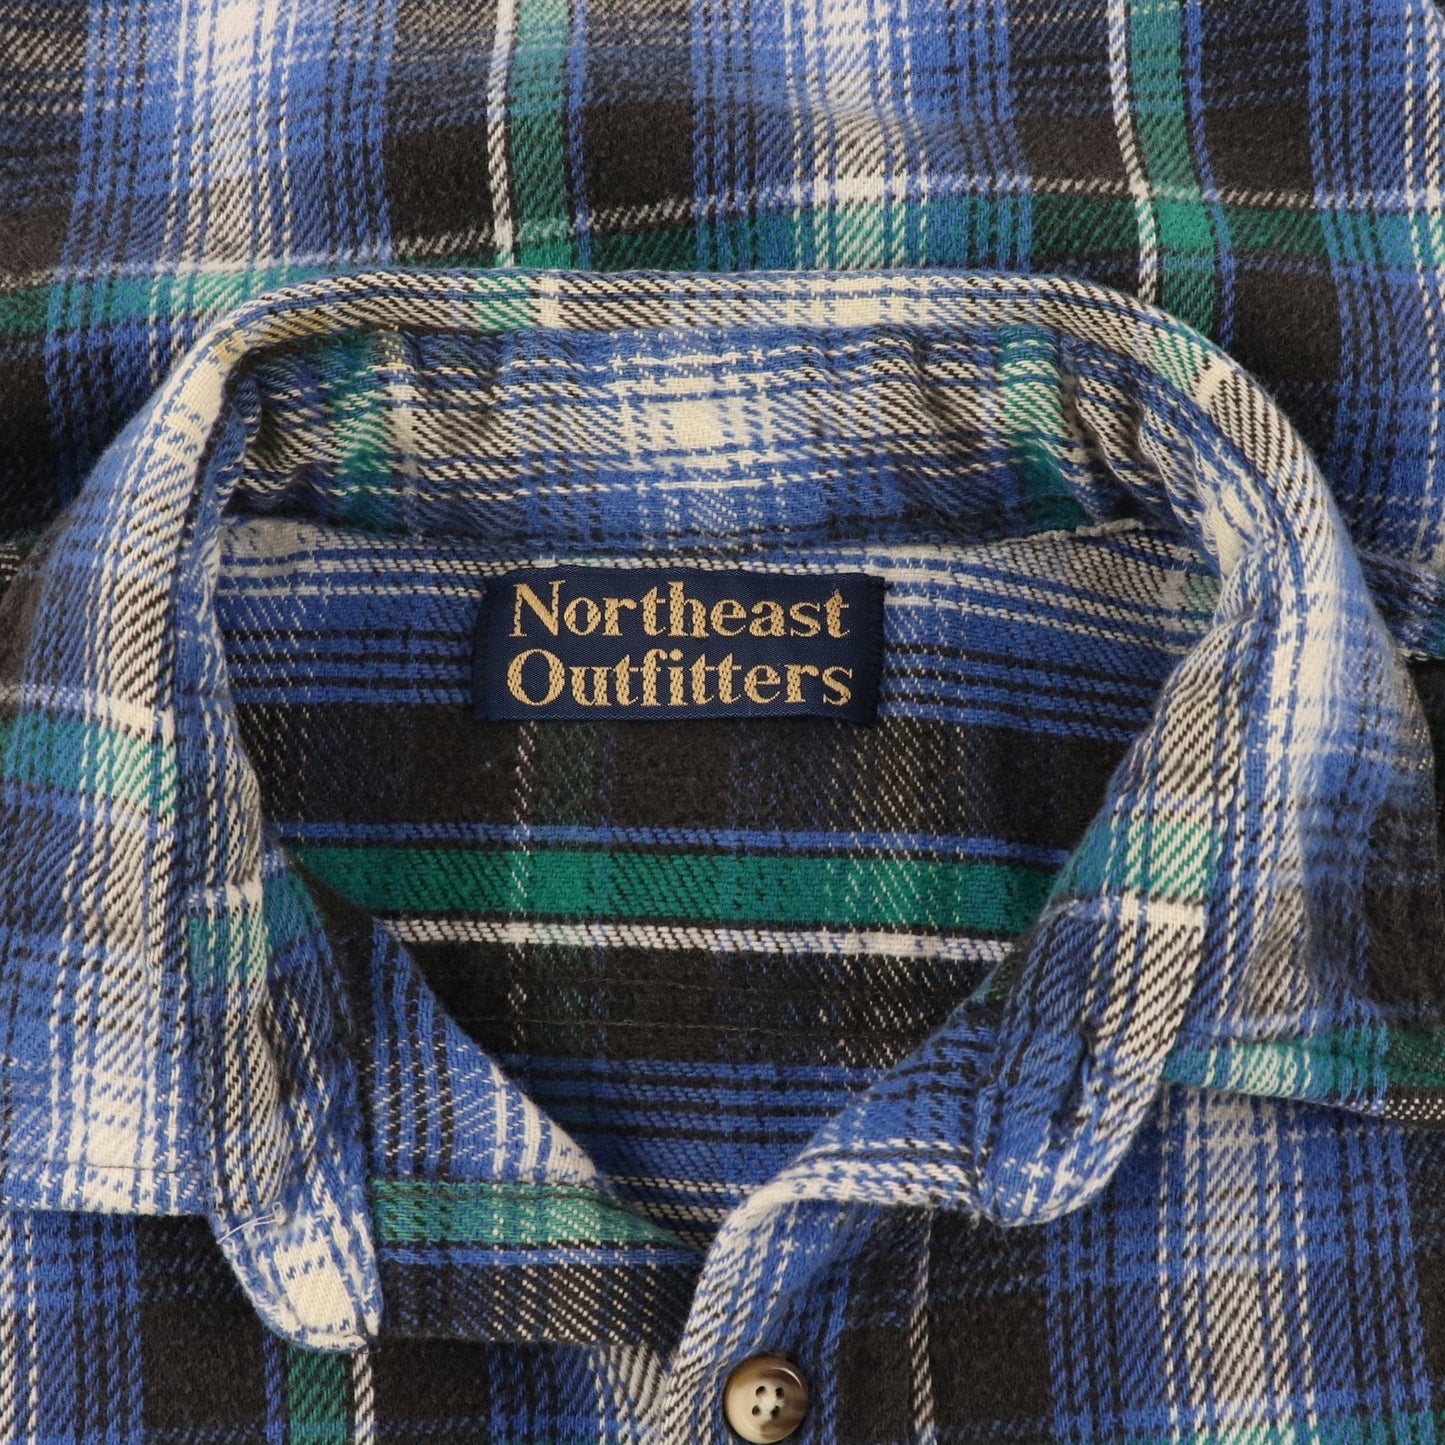 Other Button Up Shirts Vintage Northeast Outfitters Flannel Shirt Size Medium